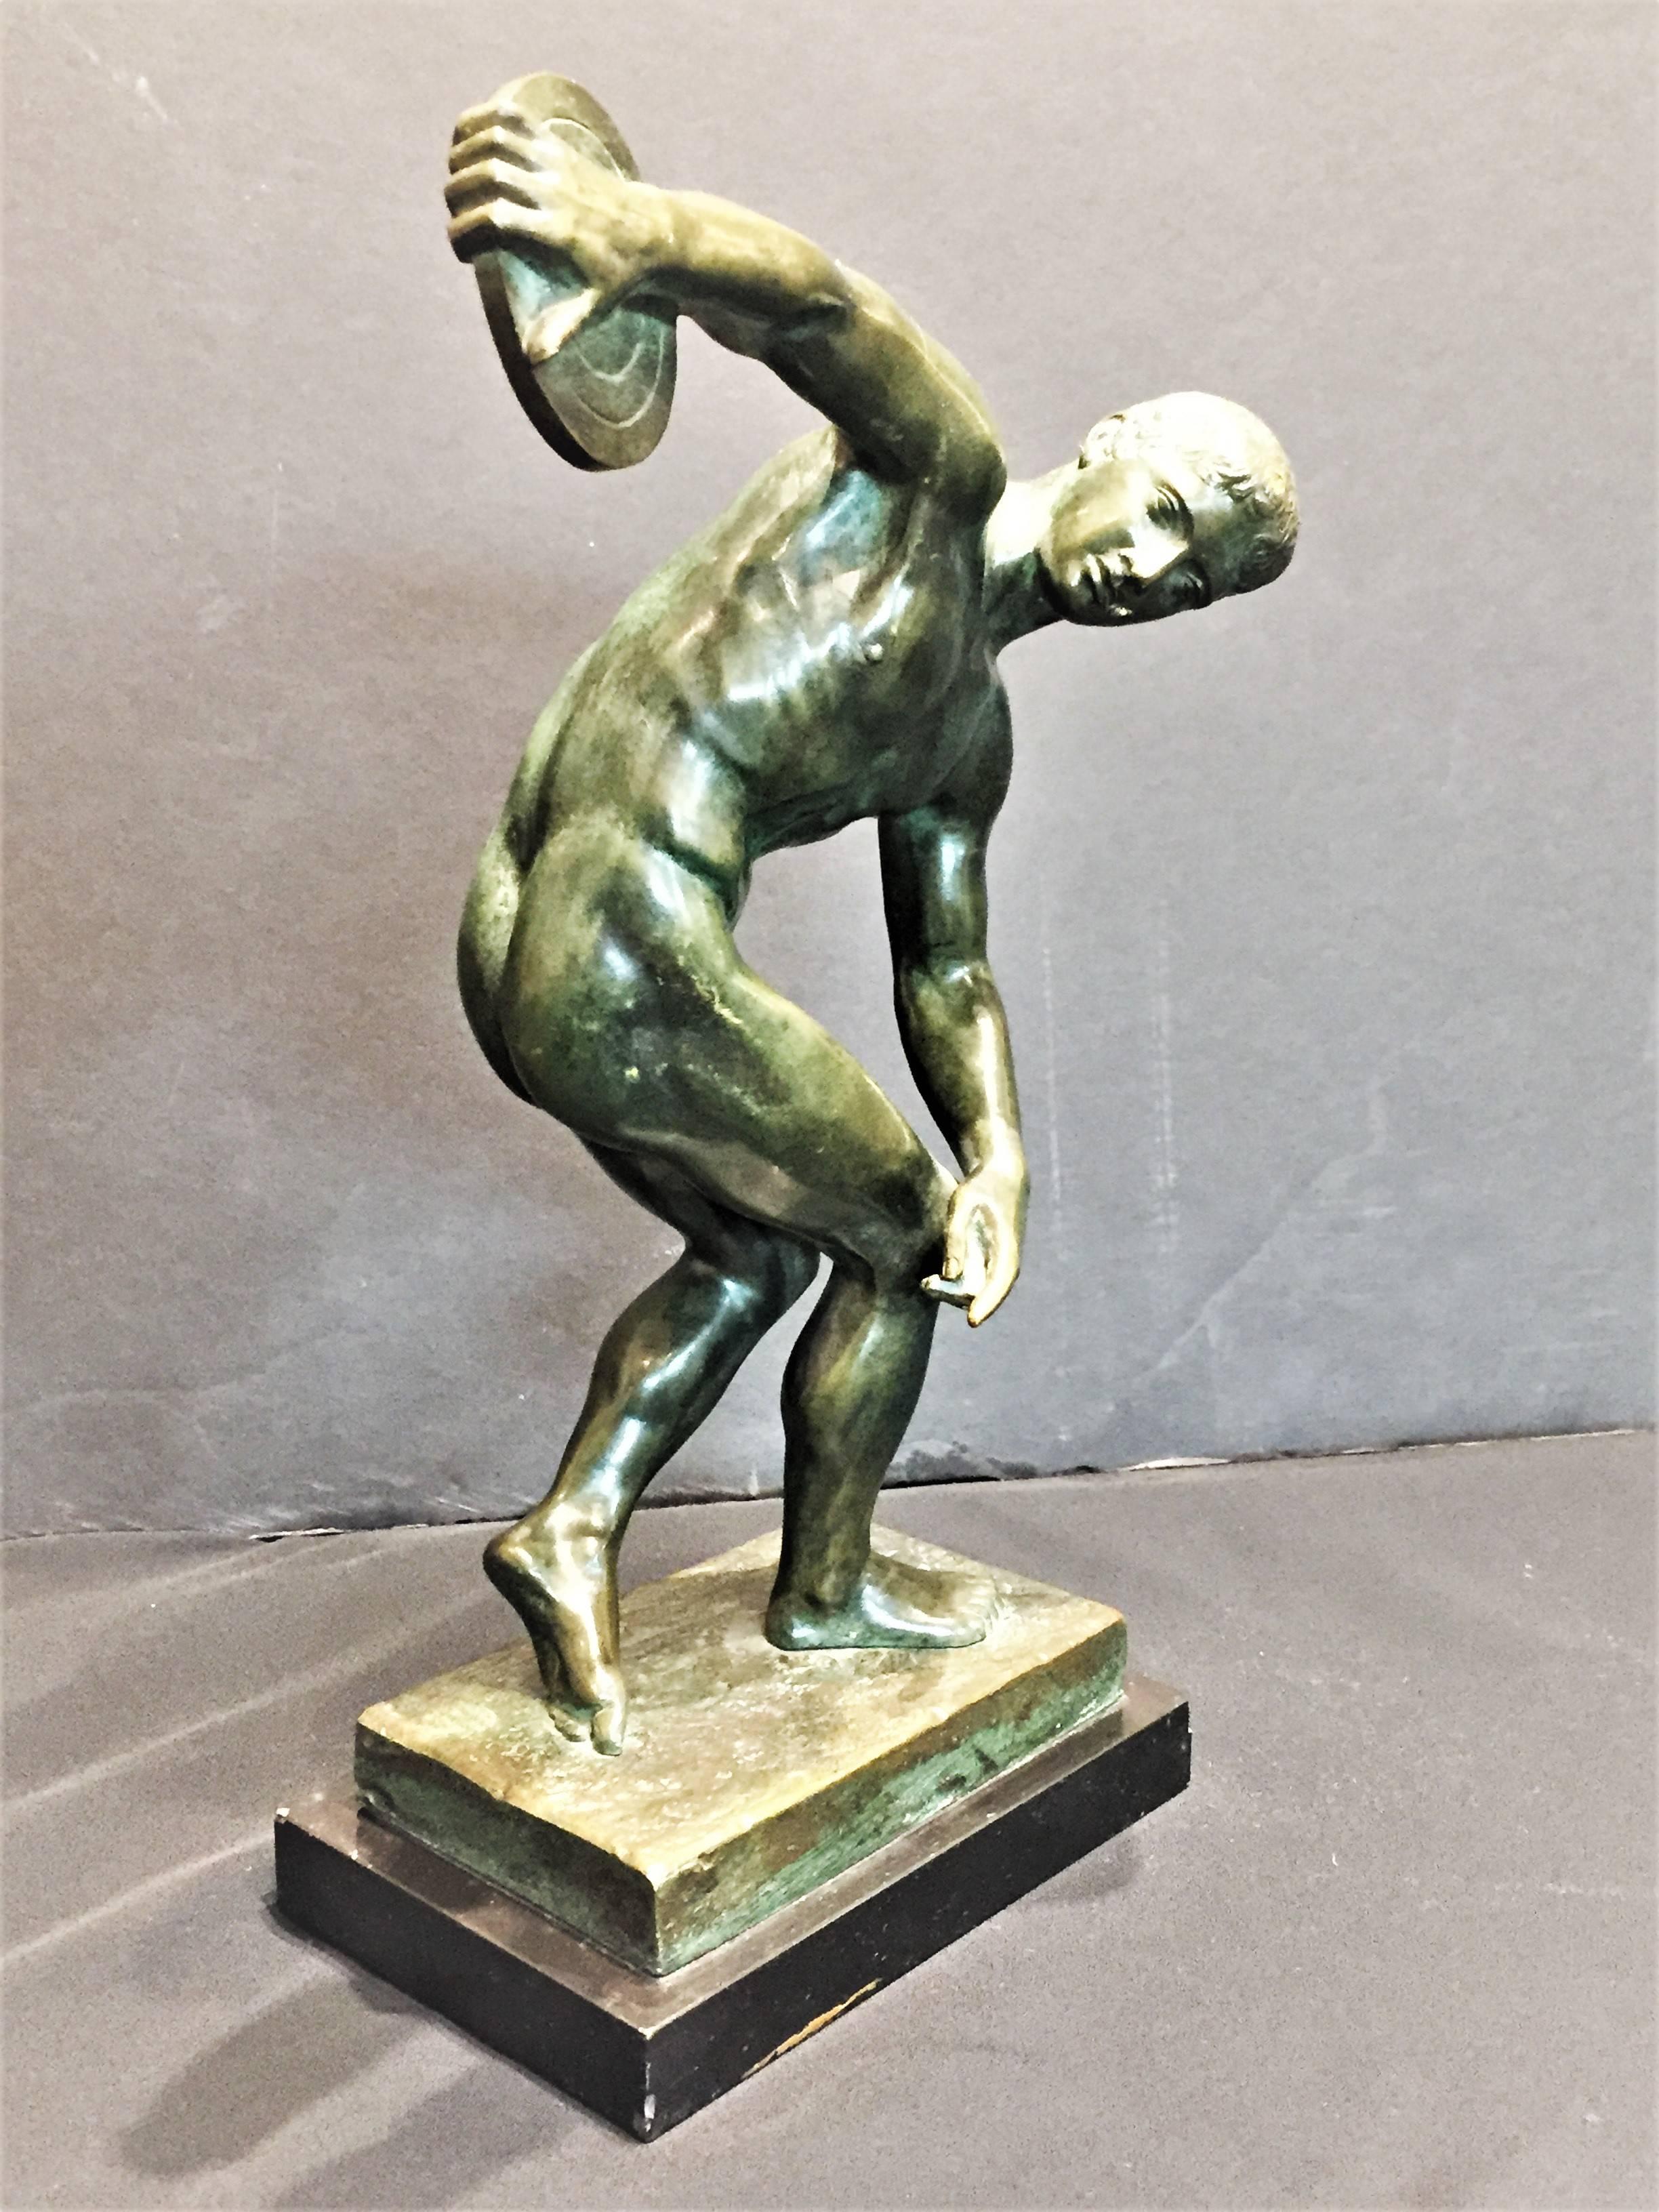 Probably, German. Created in Europe, in the 1920s-1930s, this beautifully founded black and green patinated bronze sculpture on its original wooden base is an Art Deco version of Discobolus (after Discobolus of Myron, a famous Greek sculpture,